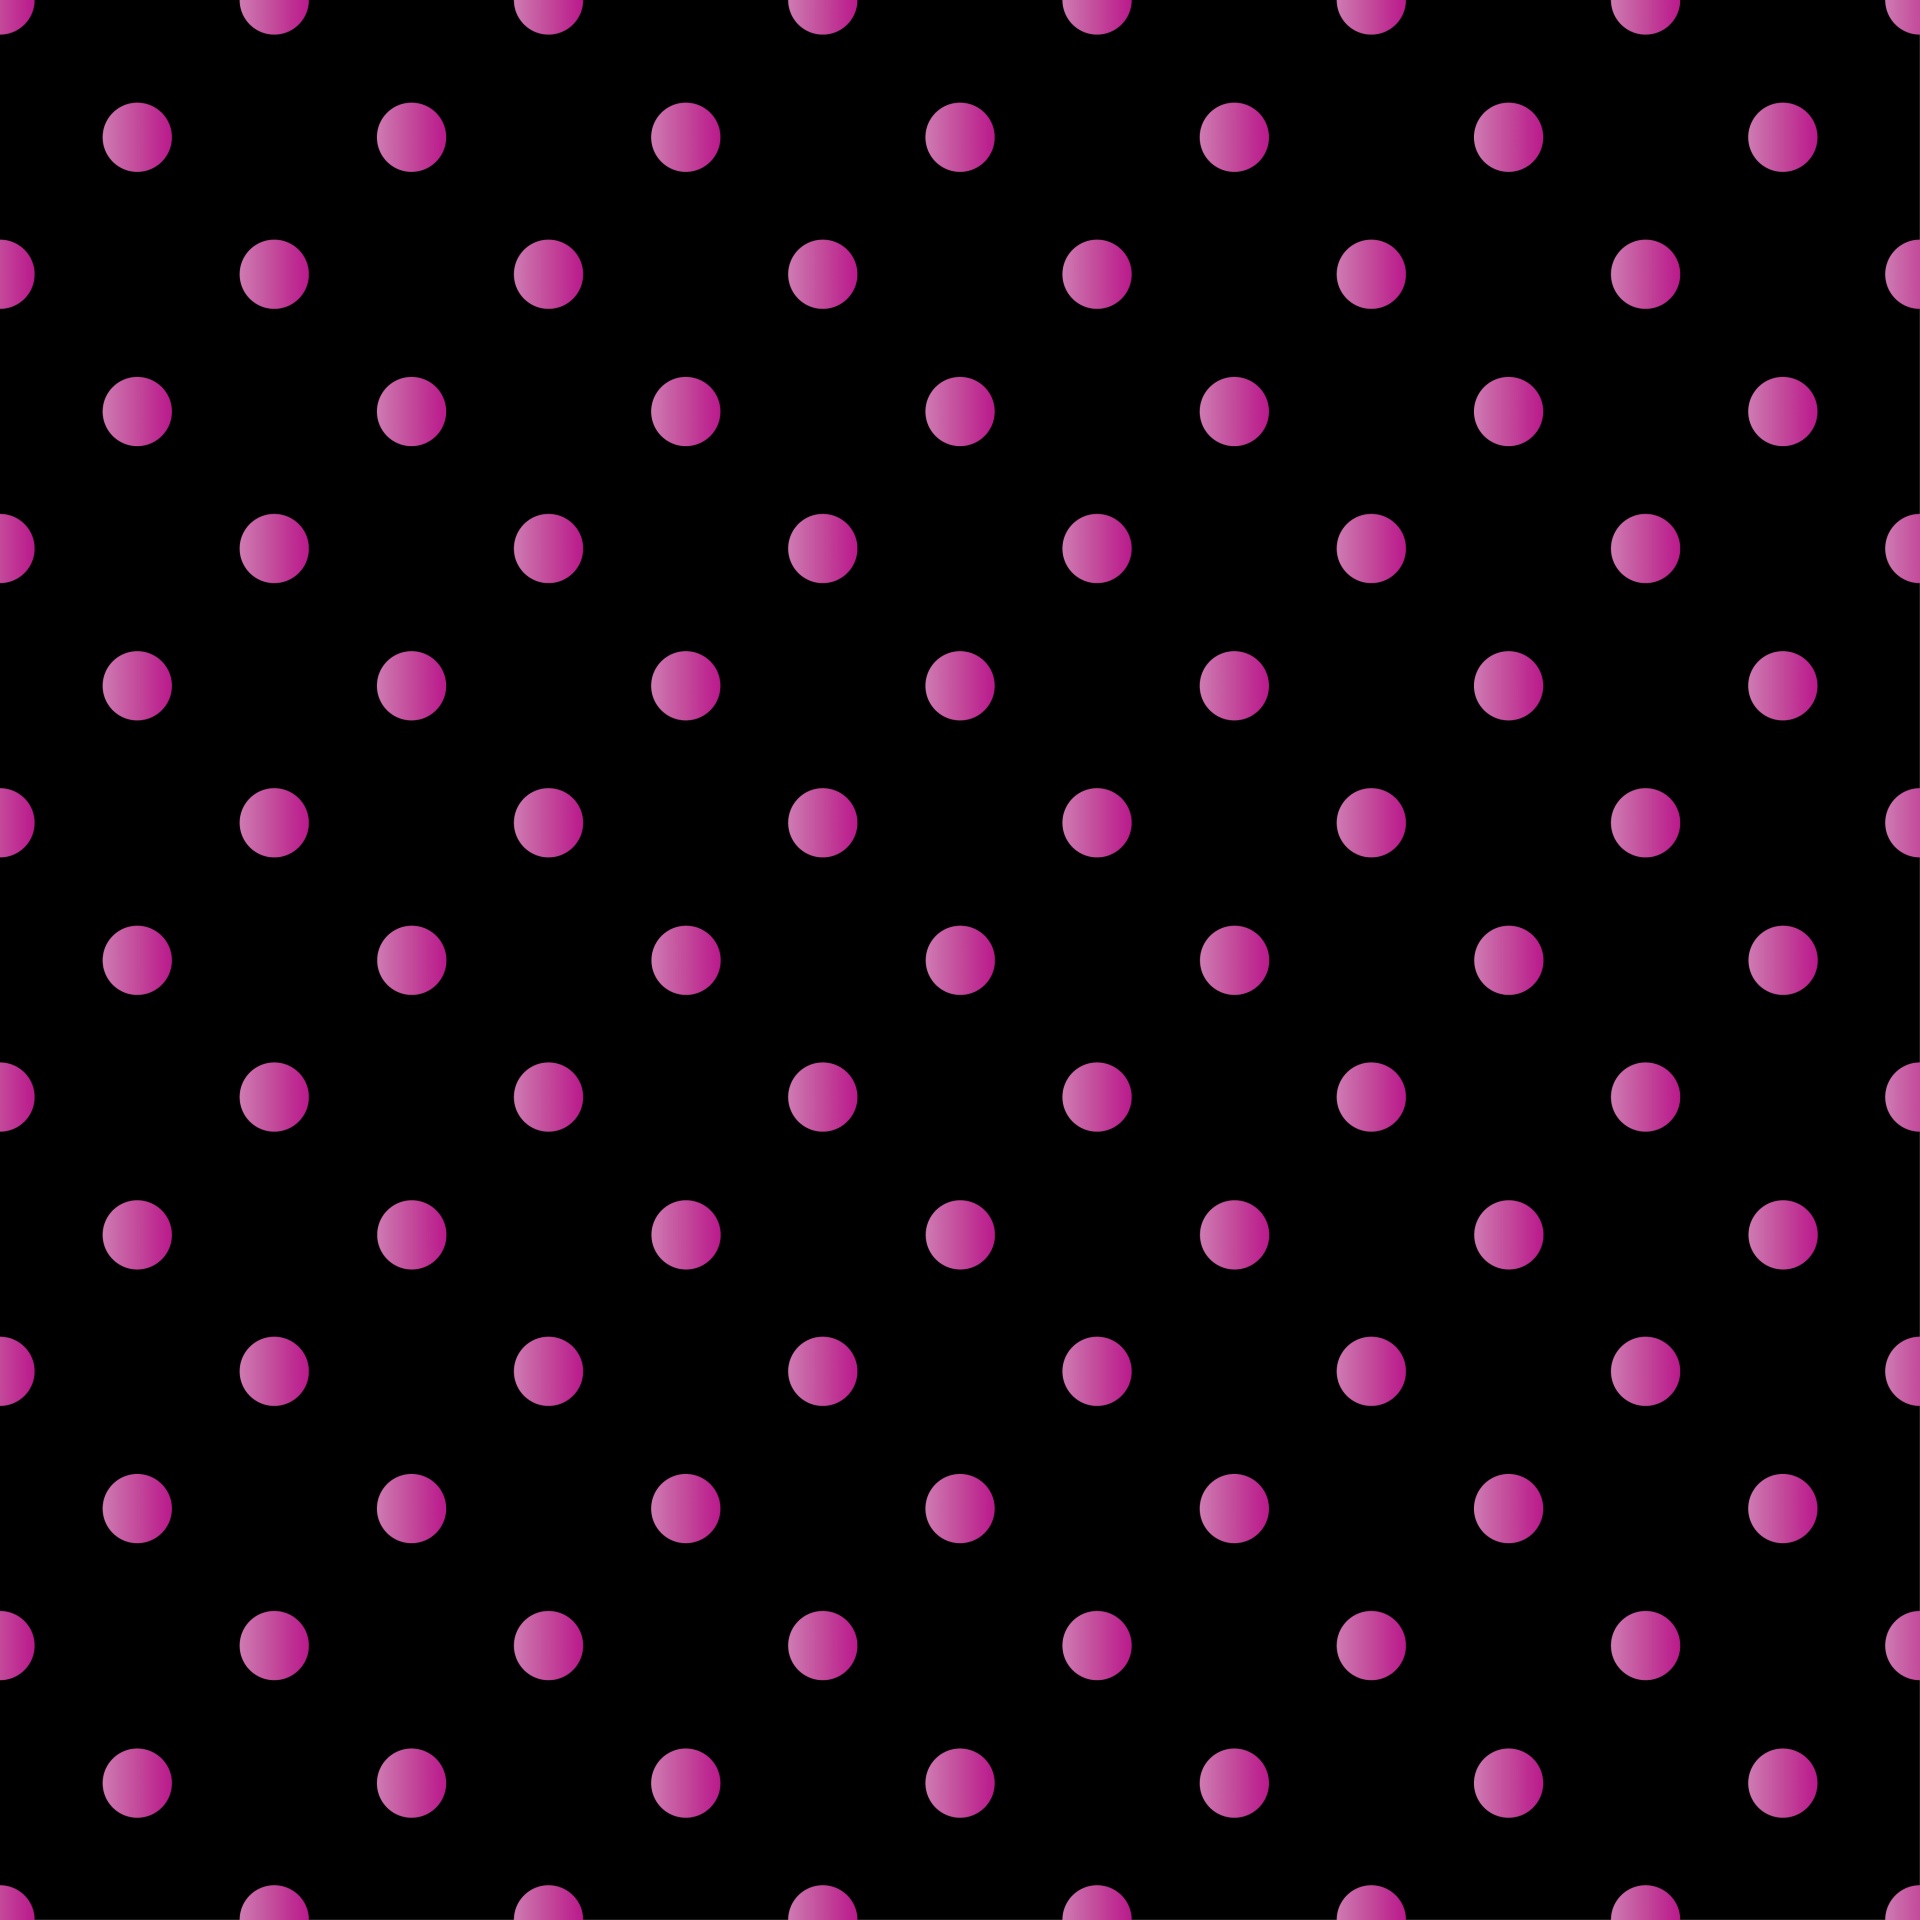 Polka Dots Pink Black Background Wallpaper Image From